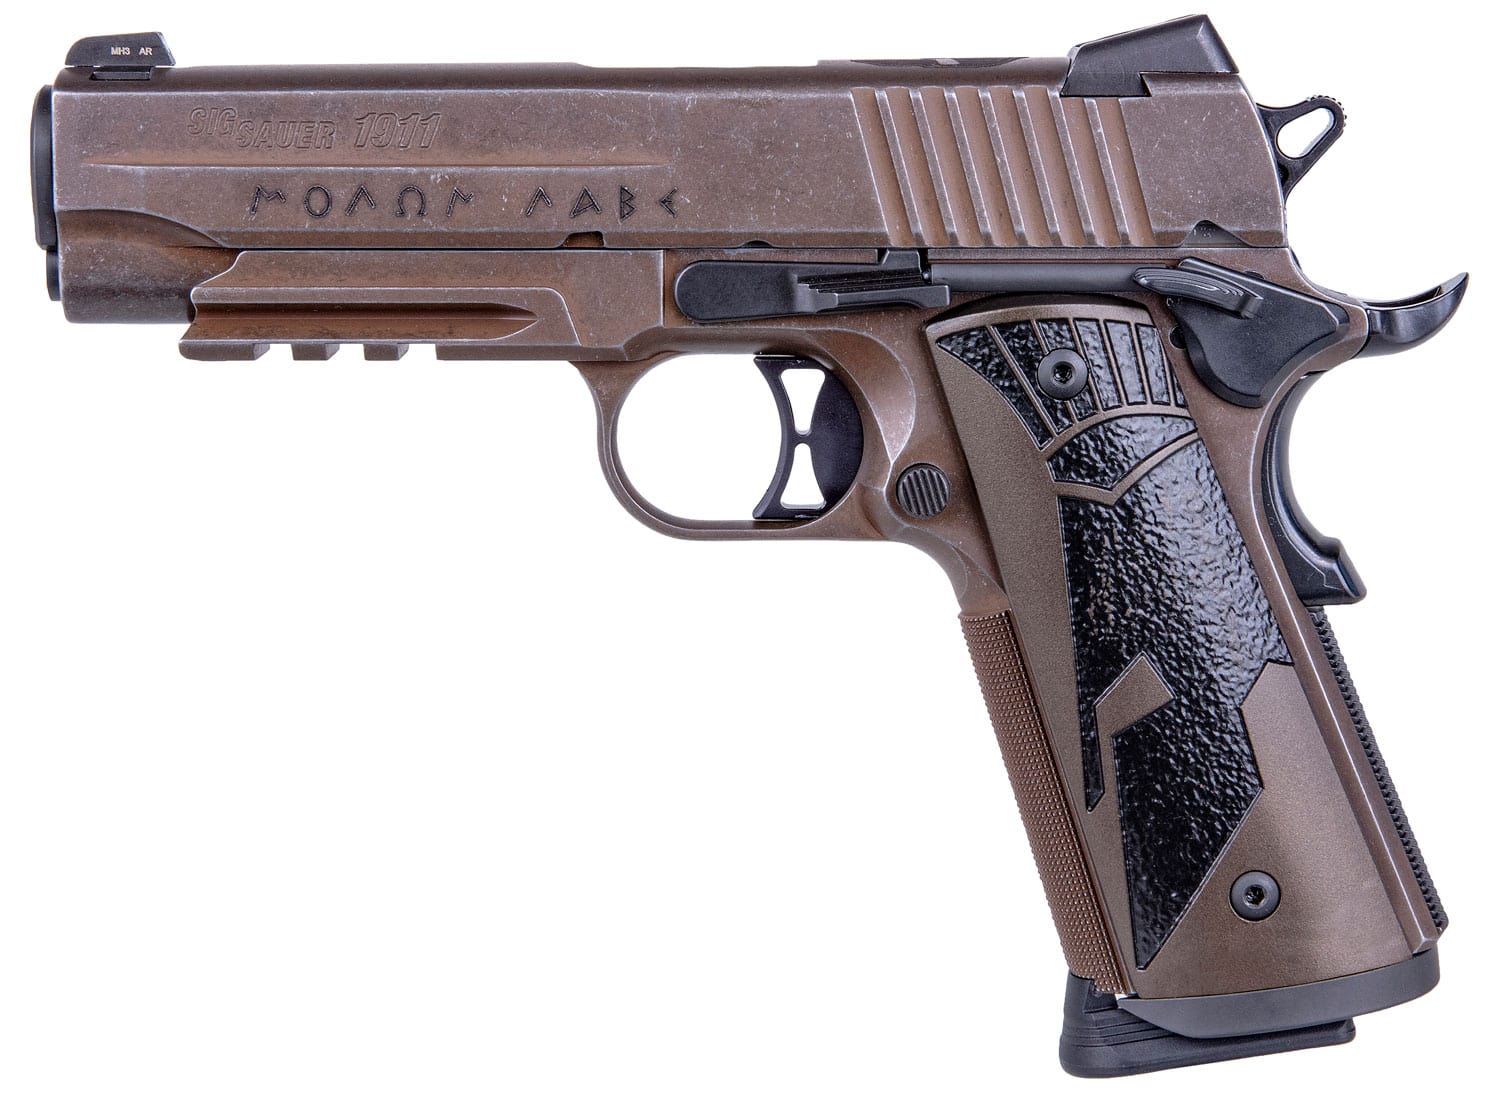 Image of SIG SAUER 1911 CARRY SPARTAN II